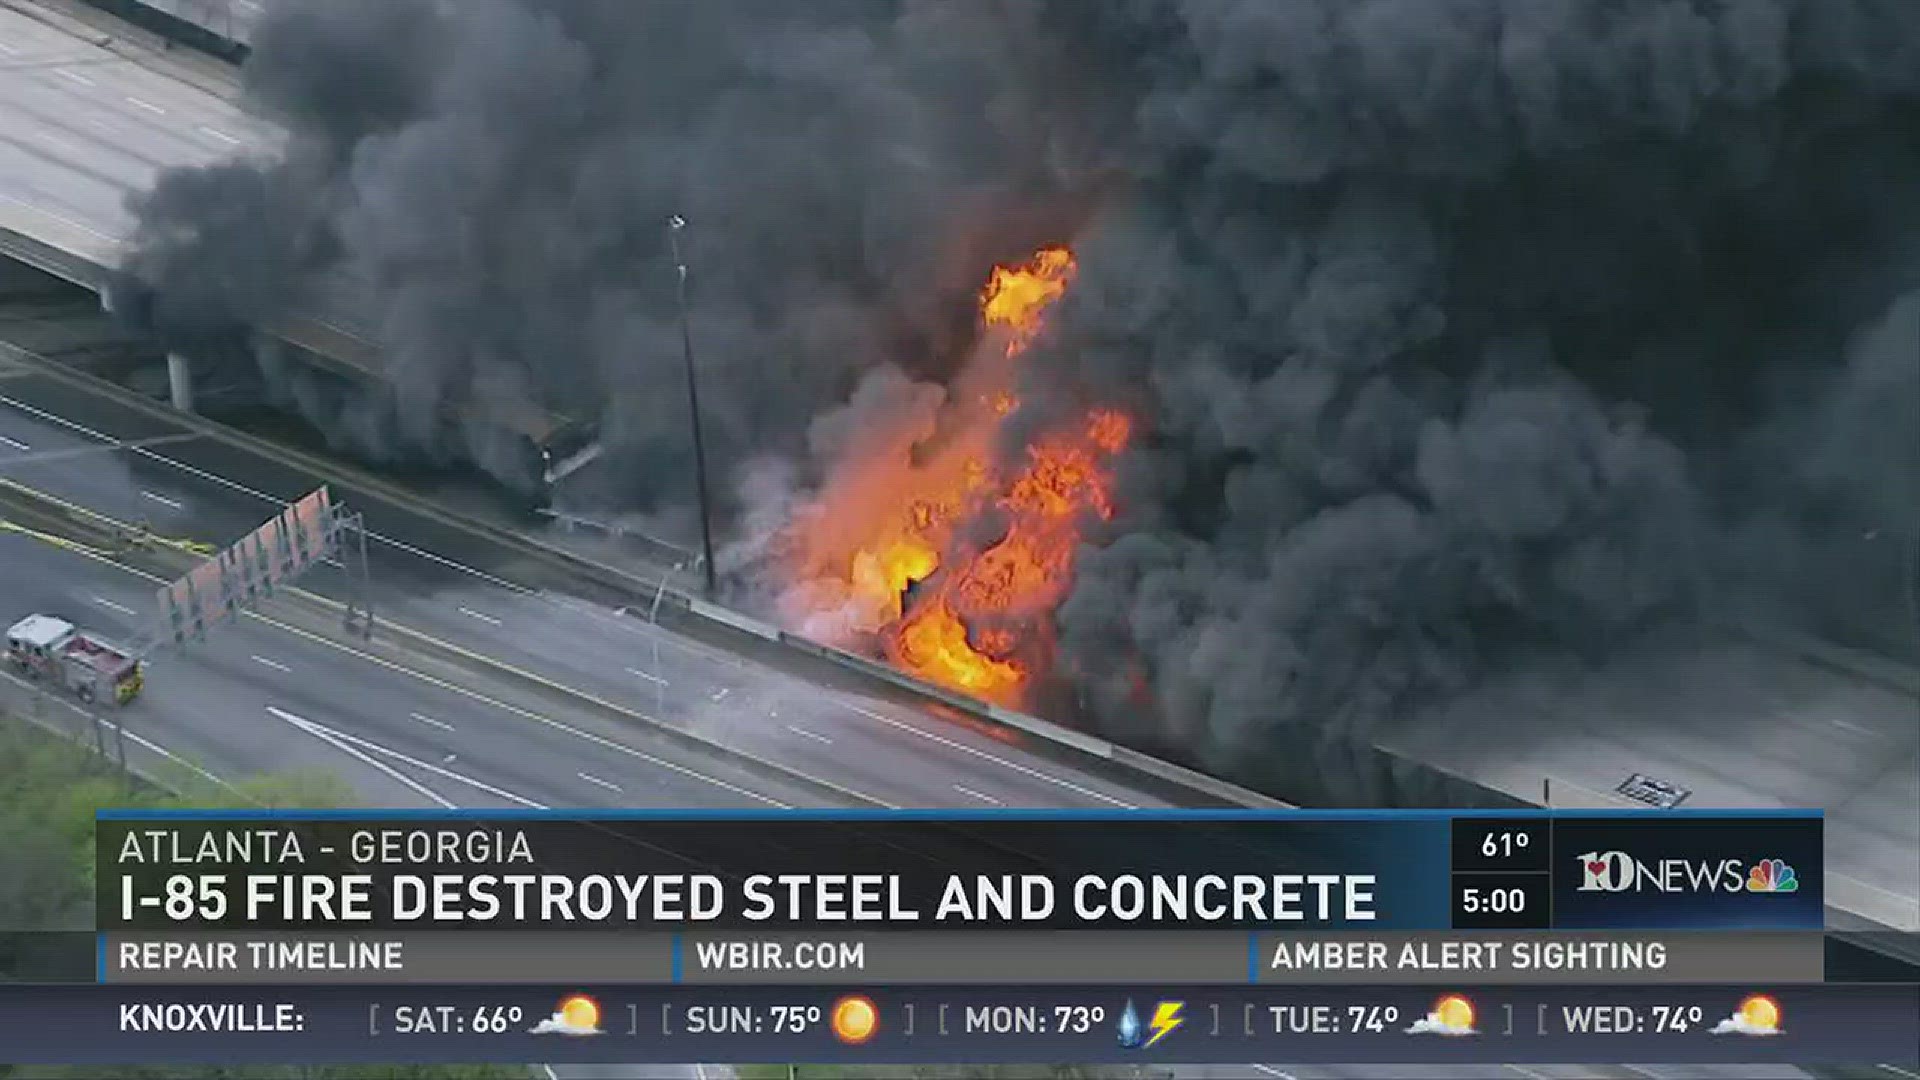 The huge fire that destroyed the Atlanta interstate burned long and hot enough to melt steel. It will be closed indefinitely.